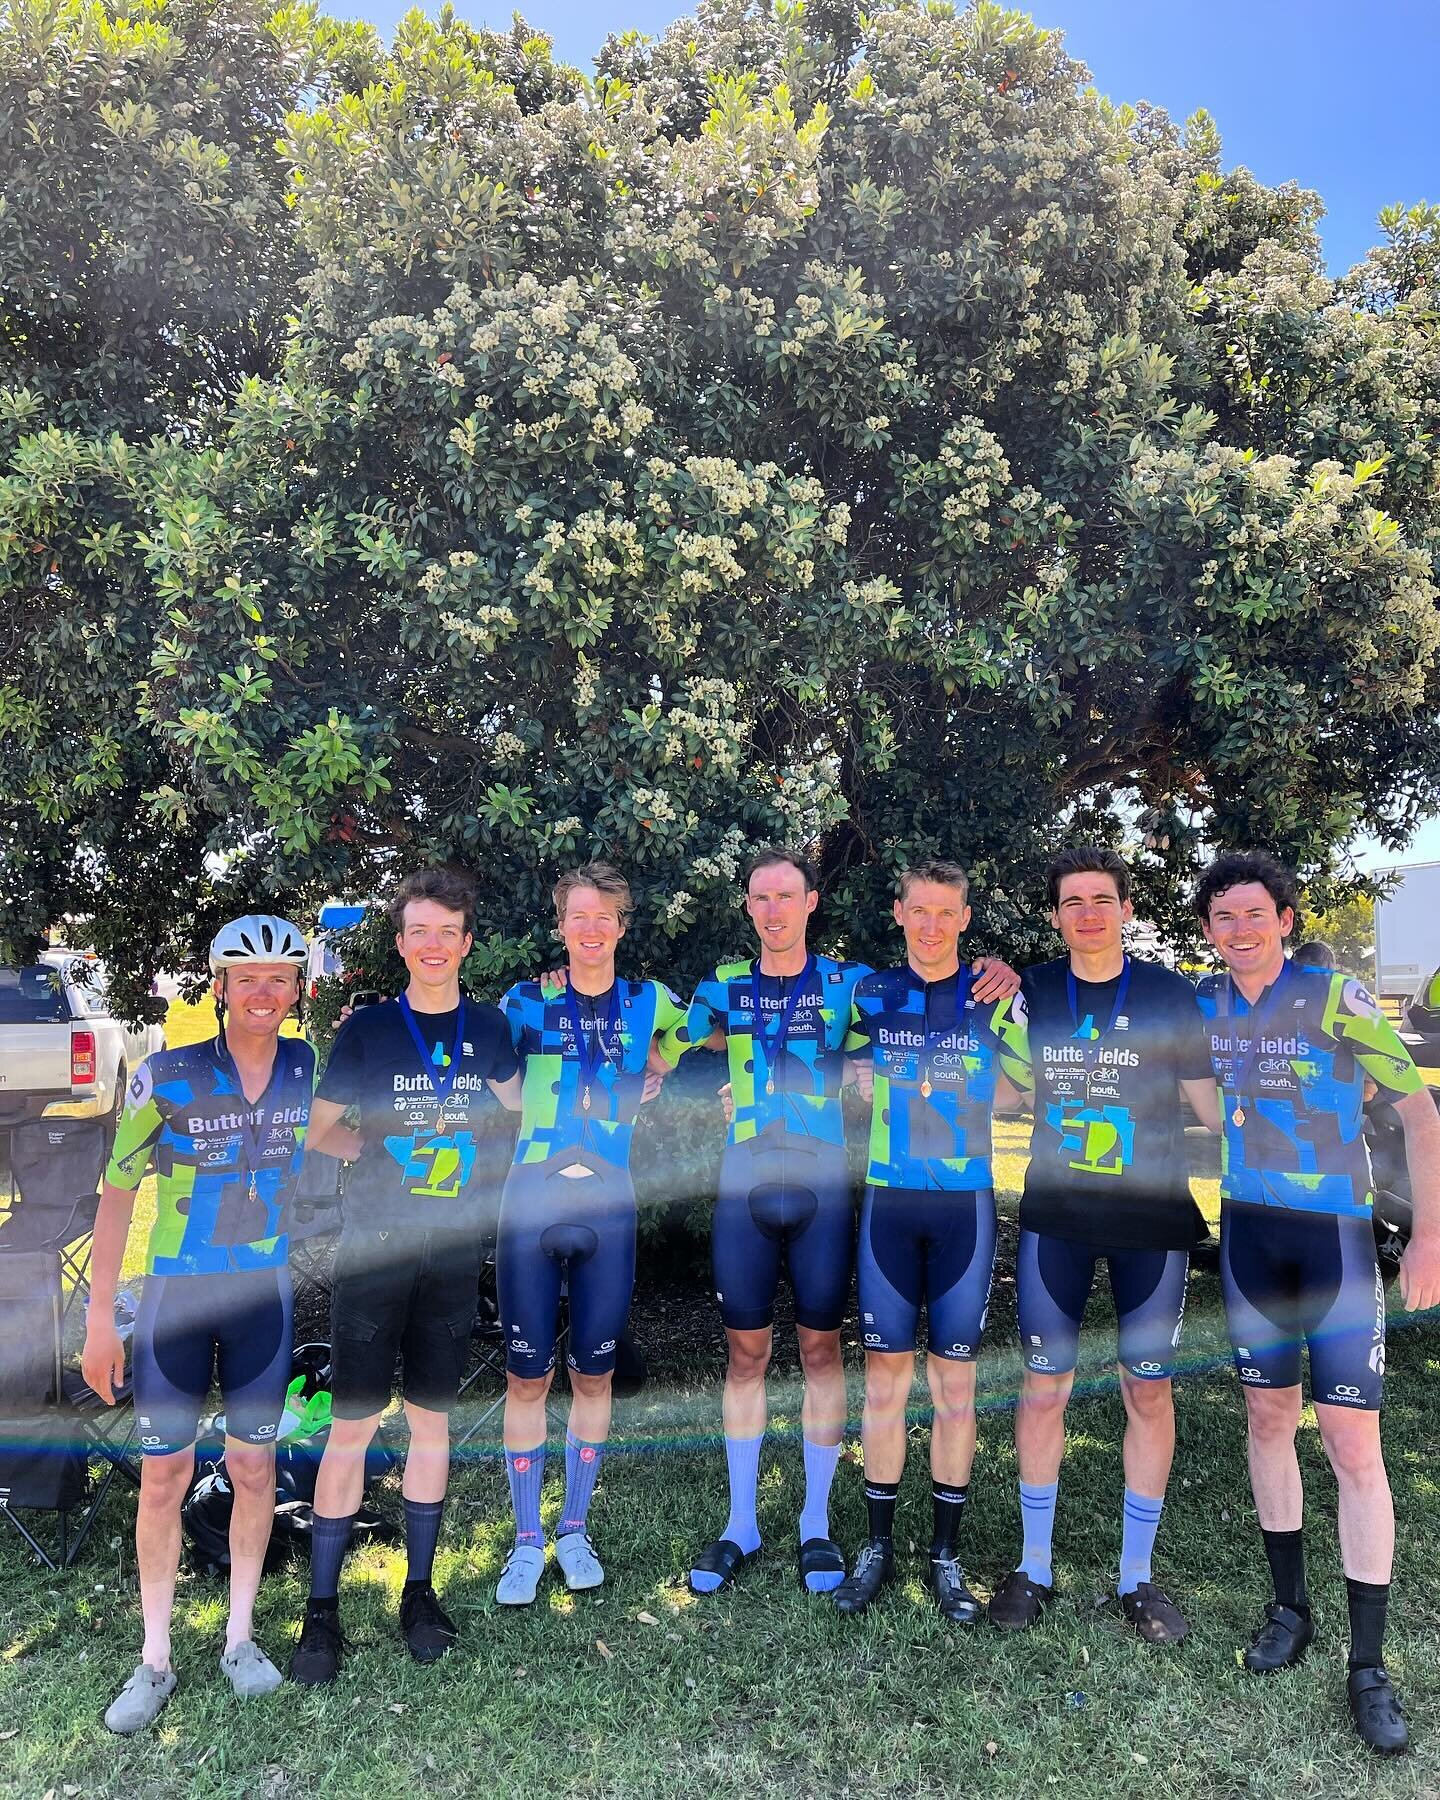 What a day 🔥 the @vandamracing boys turned it on with @ivenbennett being our top finisher getting up for 6th at @m2wcyclingclassic 😮&zwj;💨 absolutely growling day in the saddle but the boys RIPPED IT UP 🔥

@ccdowdell 15th
@gus_miller6 23rd
@conno